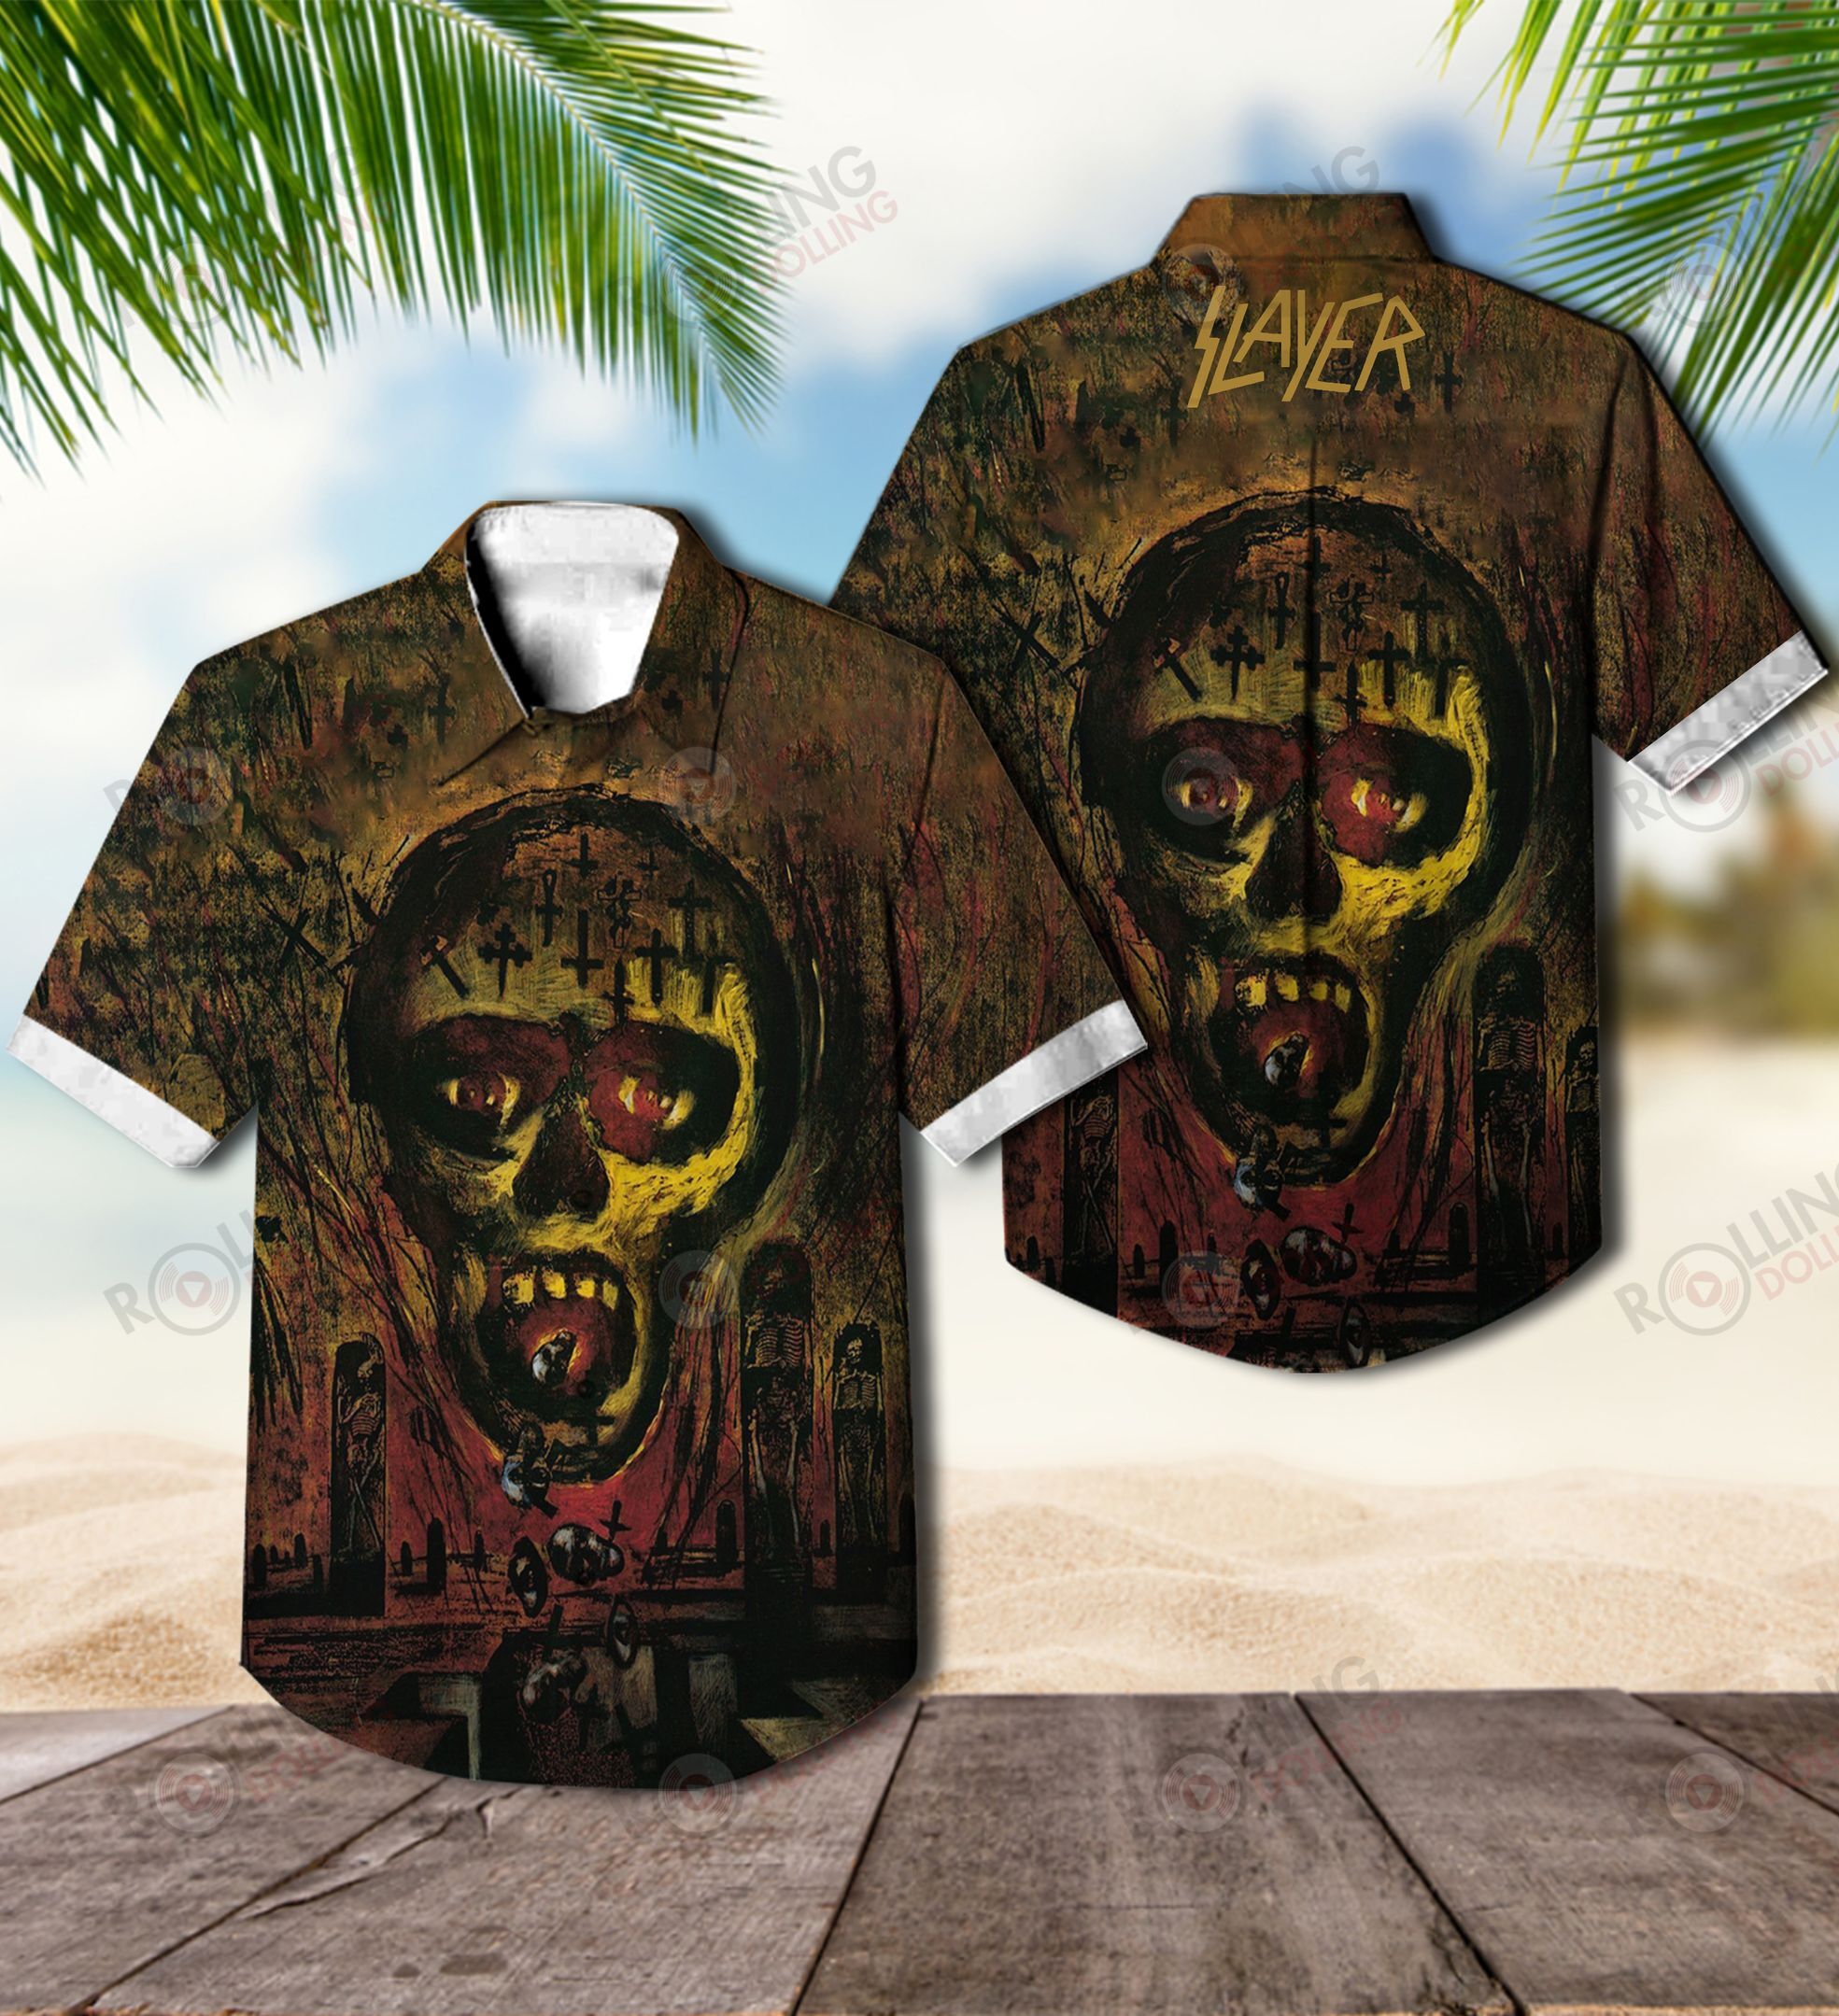 The Hawaiian Shirt is a popular shirt that is worn by Rock band fans 27